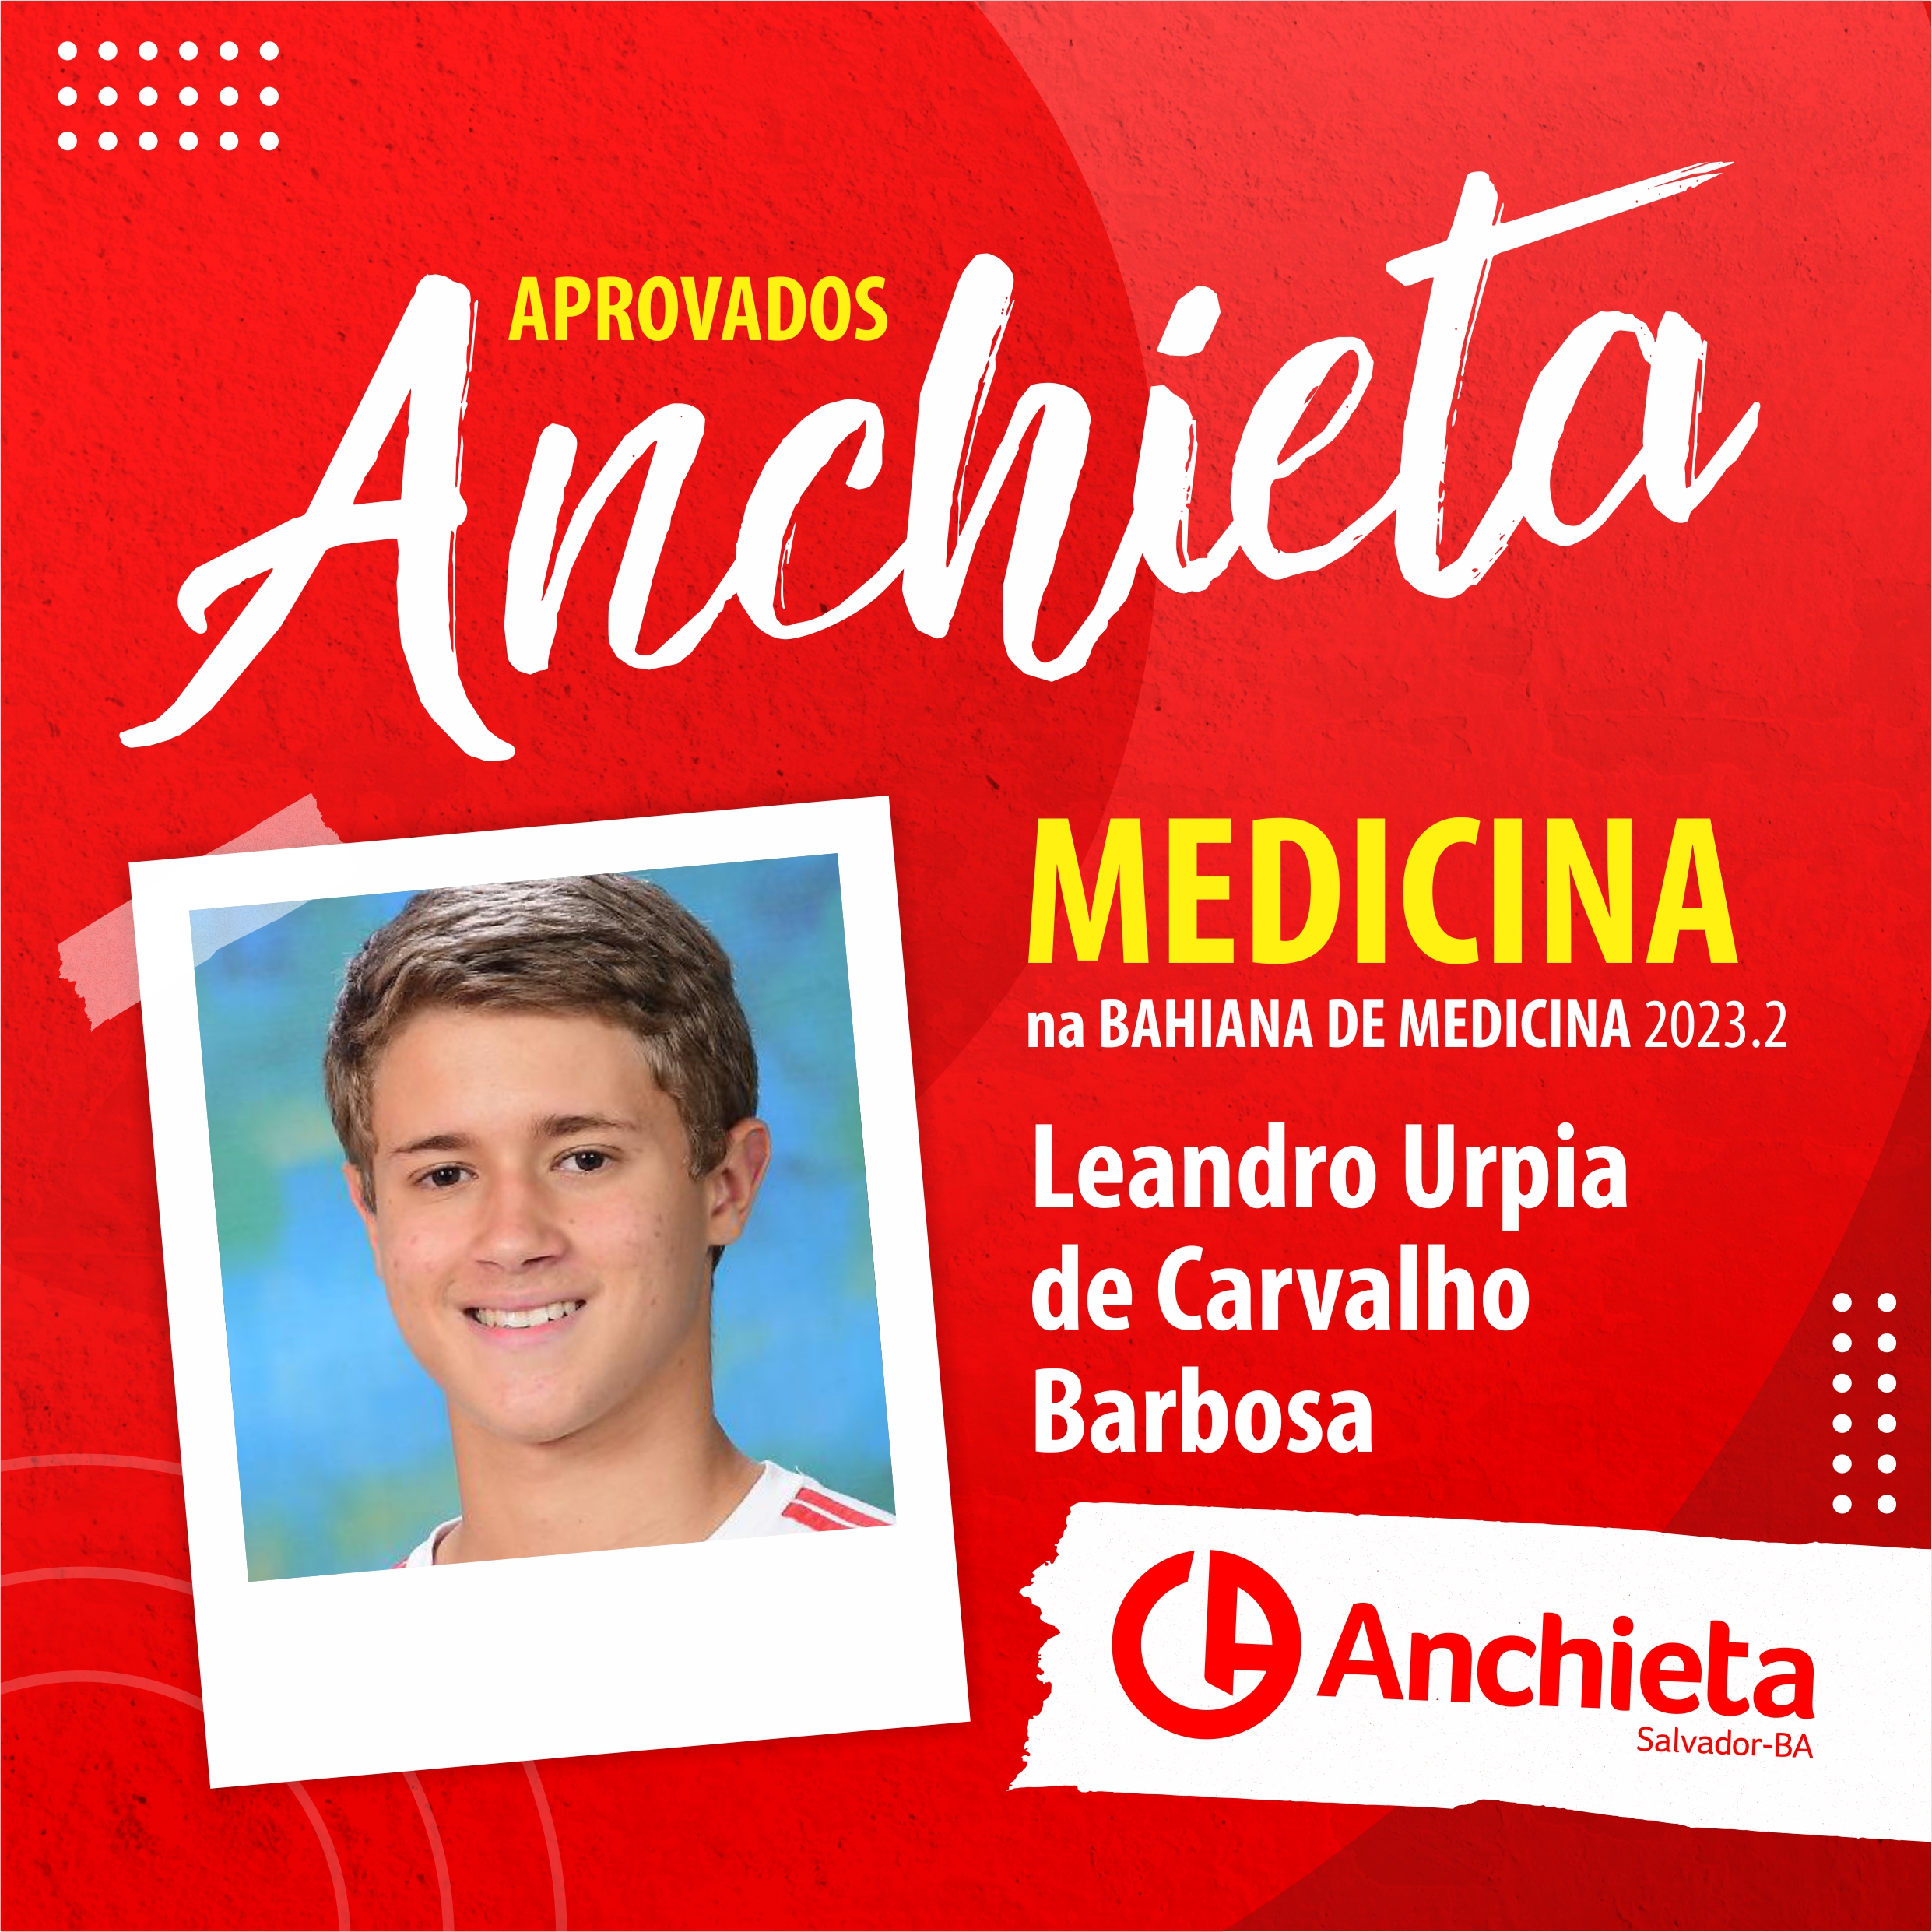 Leandro Urpia - CARD2023_Aprovados_PIT